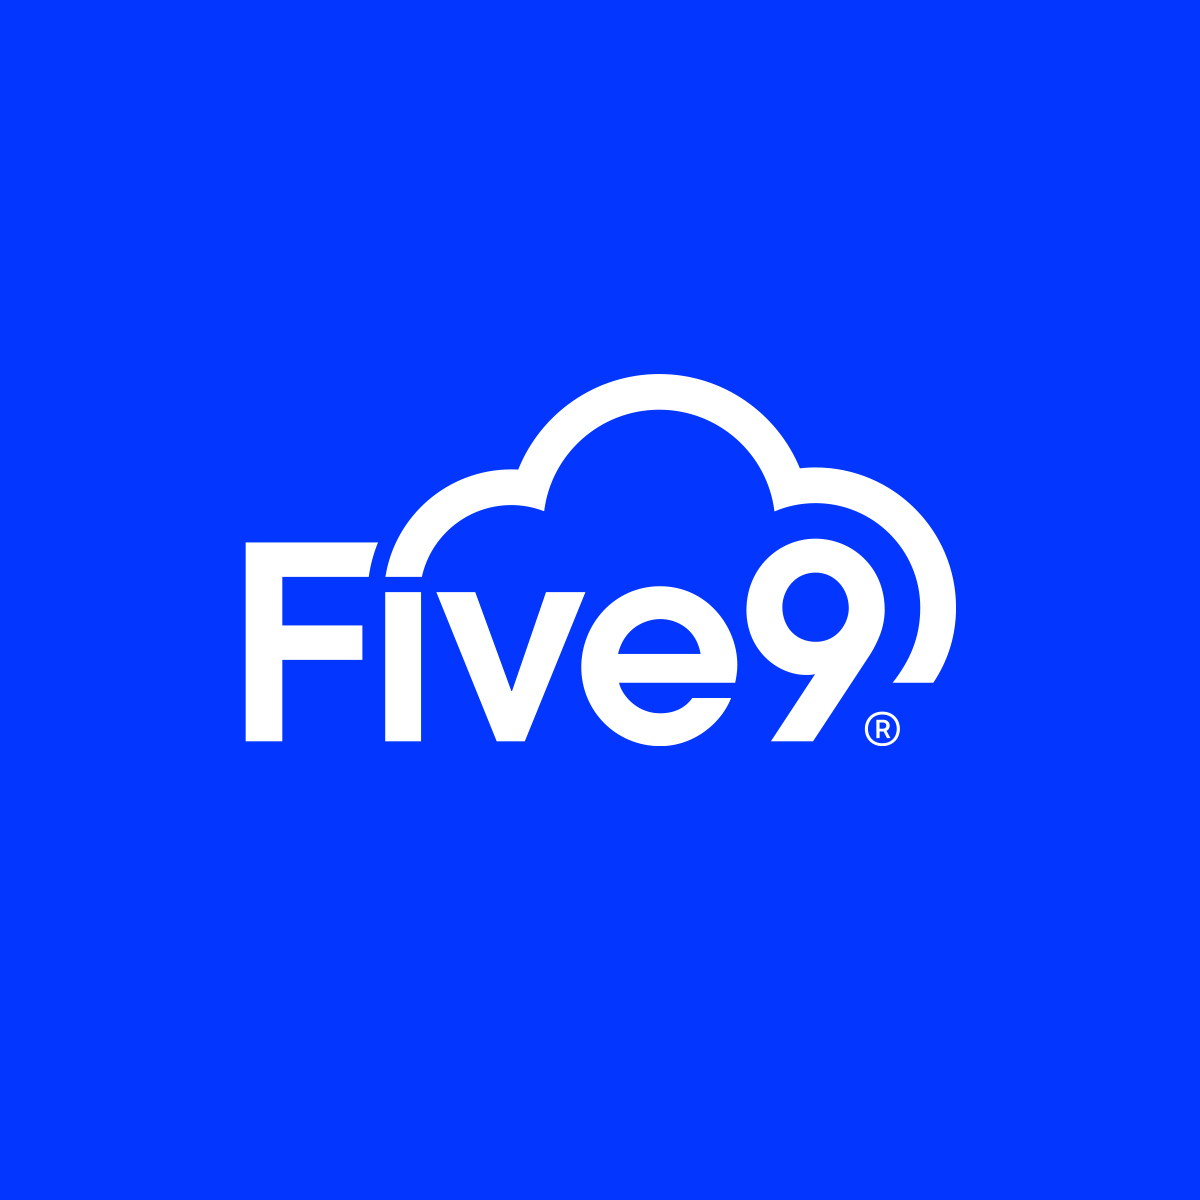 #Five9 closed 2023 with strong growth & continued business momentum leading into 2024. Our commitment to product innovation, expanding our ecosystem with strategic partners, and global investments strengthened our market standing. Read more. #PressRelease spr.ly/6018wU2WI